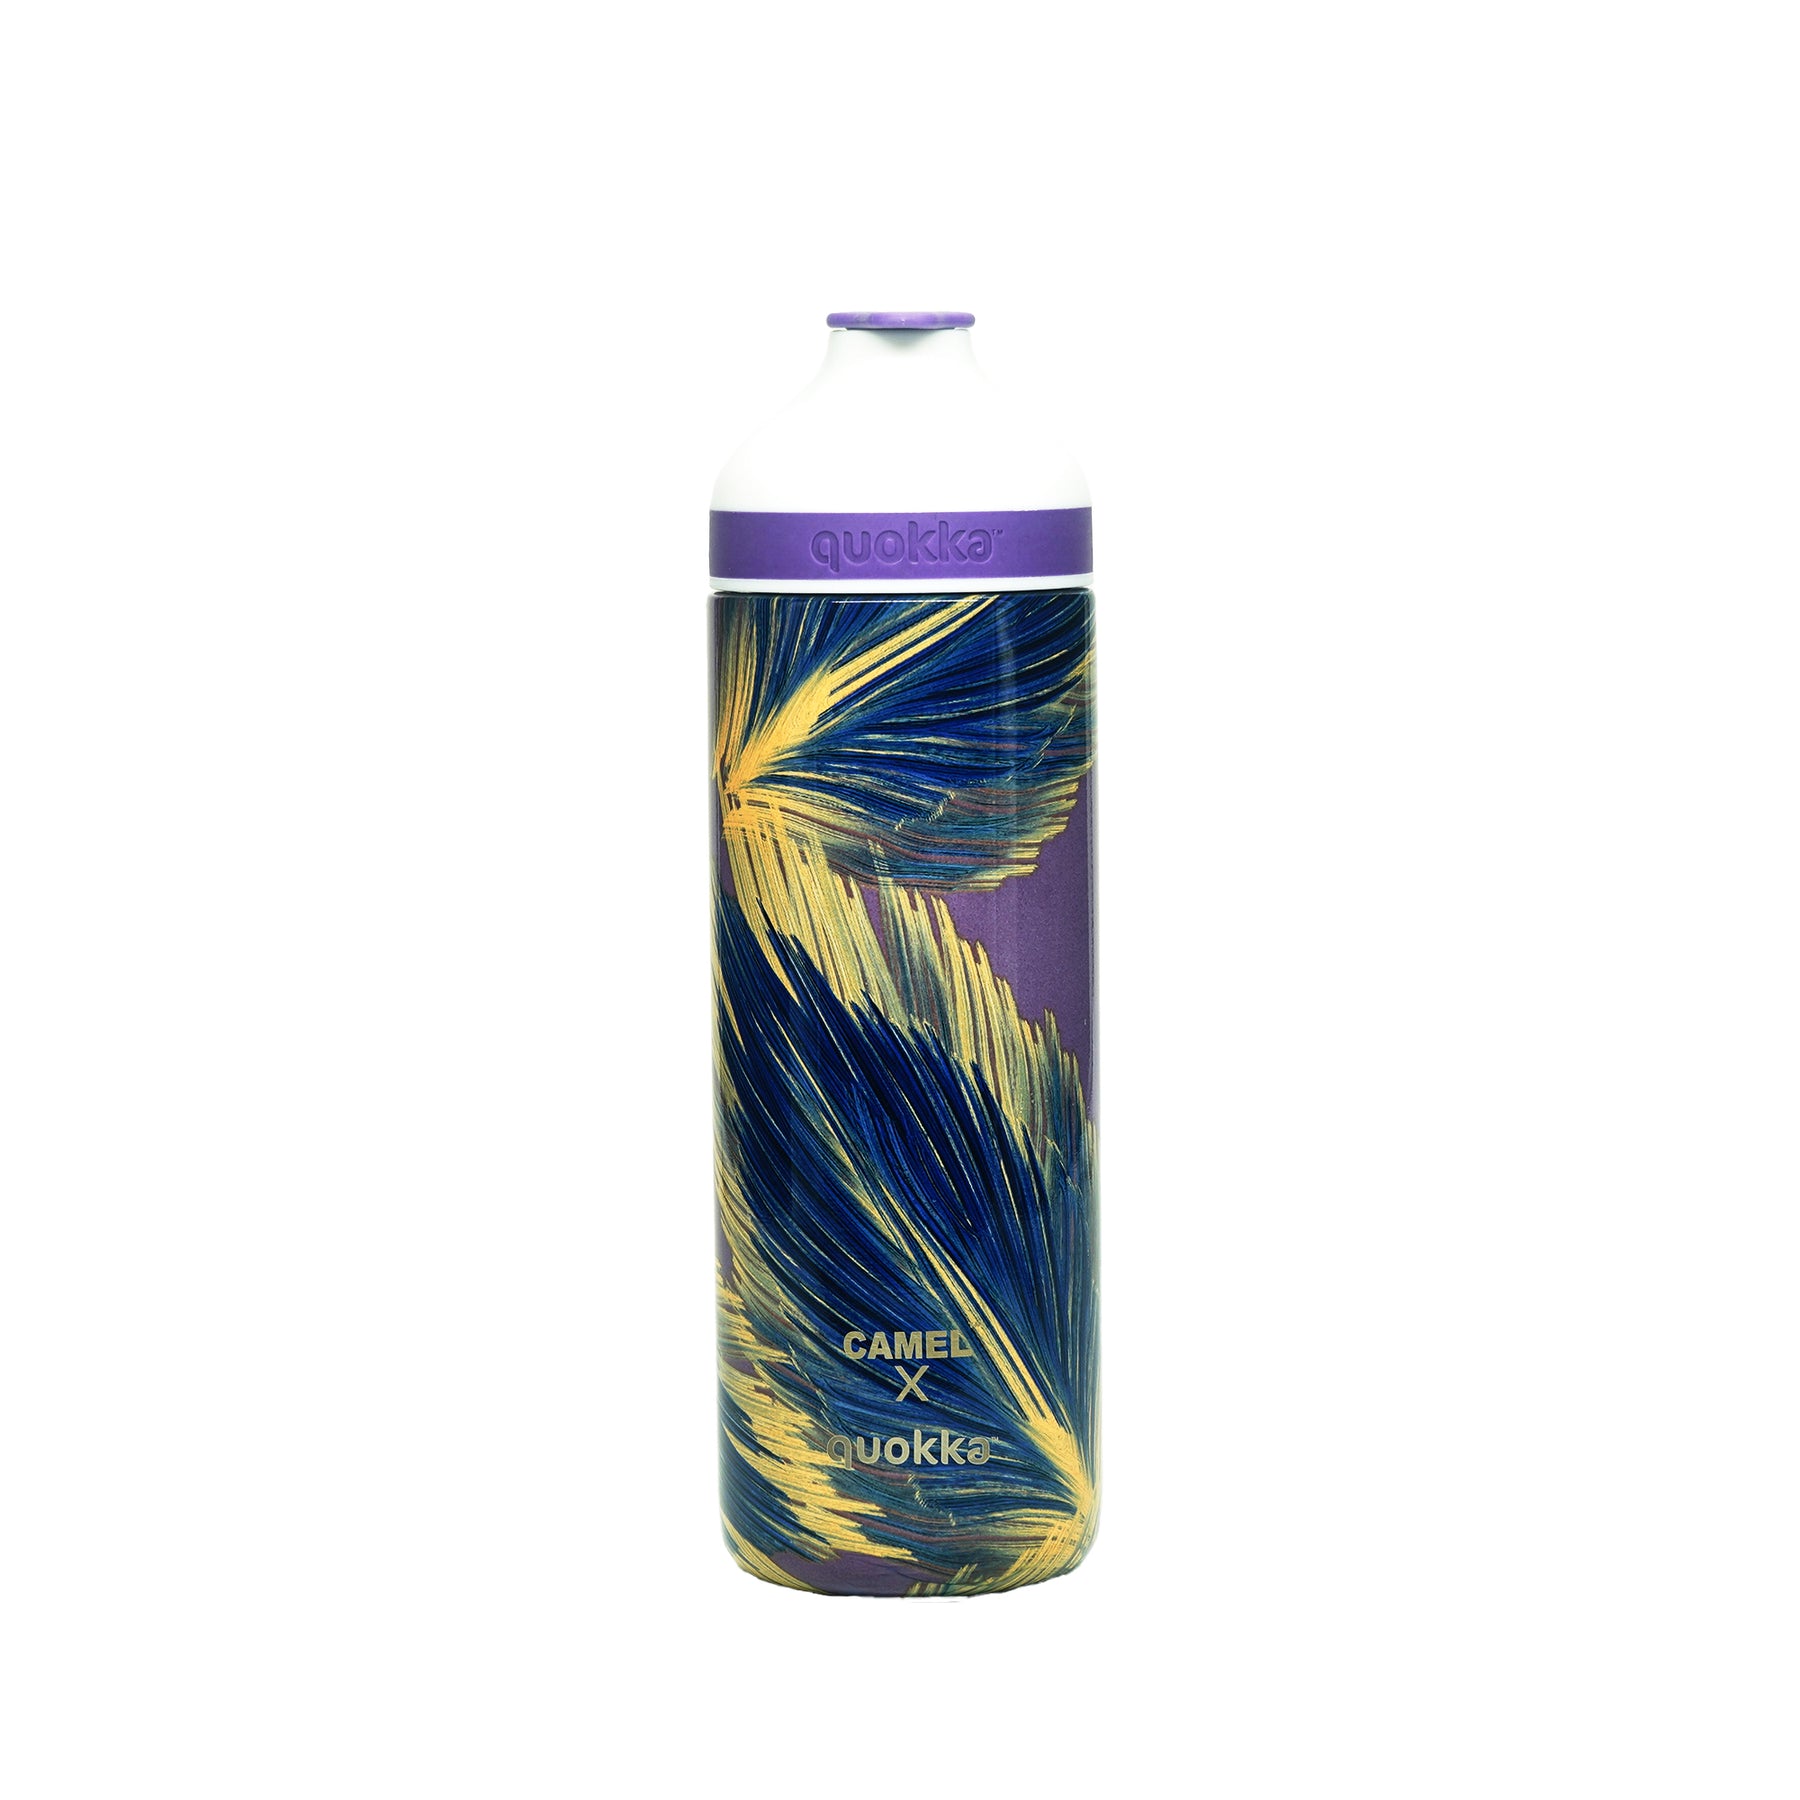 MAGSNAP Vacuum Bottle (Magnetic Feature) Purple Abstract